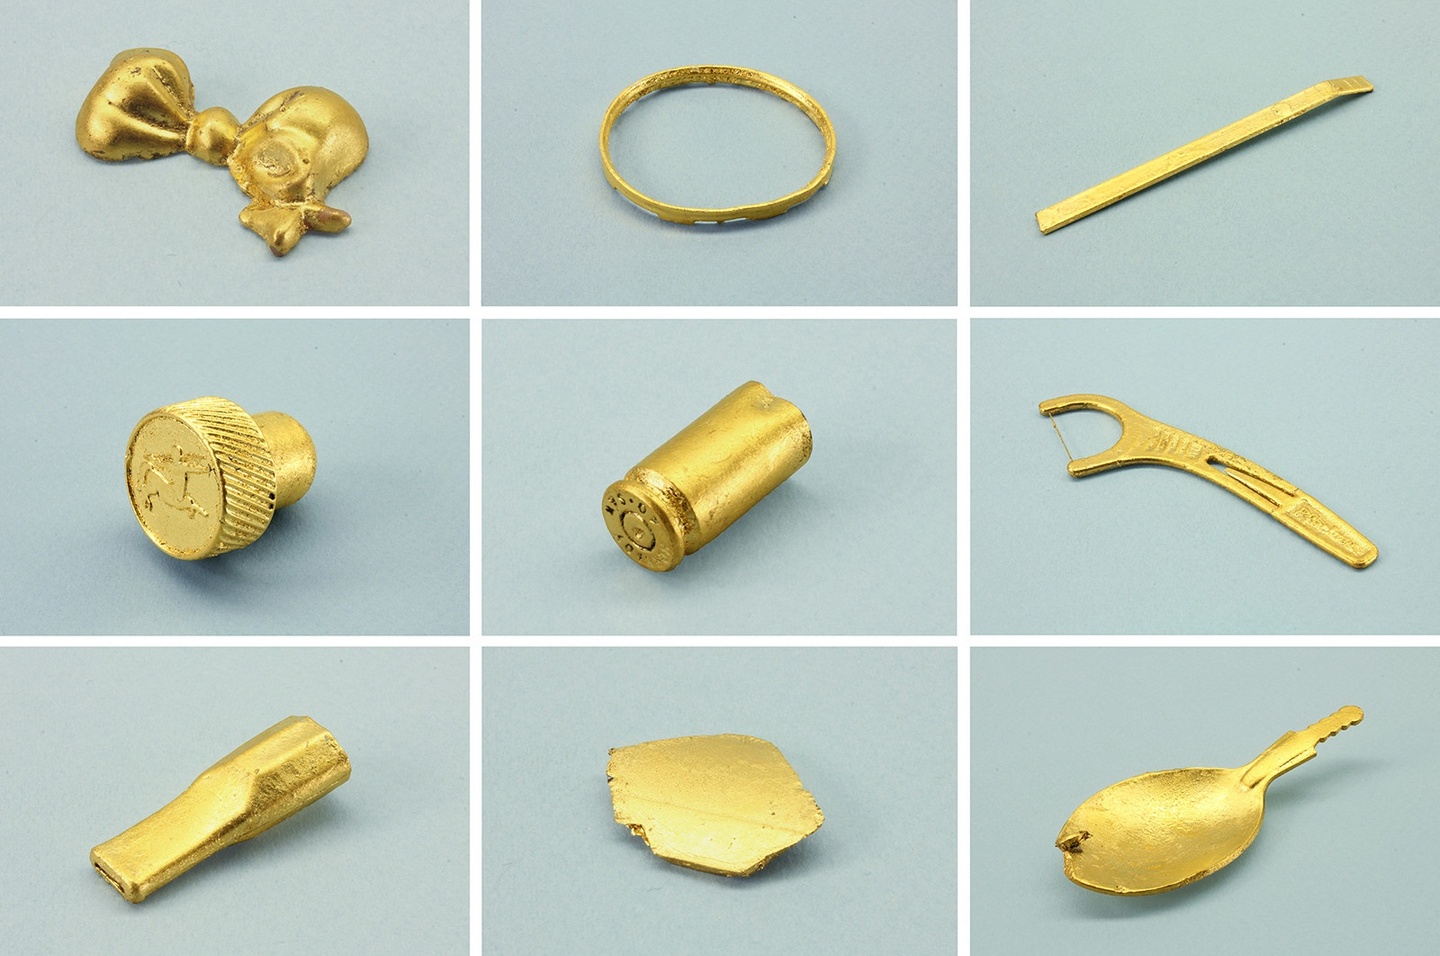 Various gilded/golden objects—including a bracelet, a flat headed screwdriver bit, and a dental flosser, among other things—photographed on a light gray-teal ground.